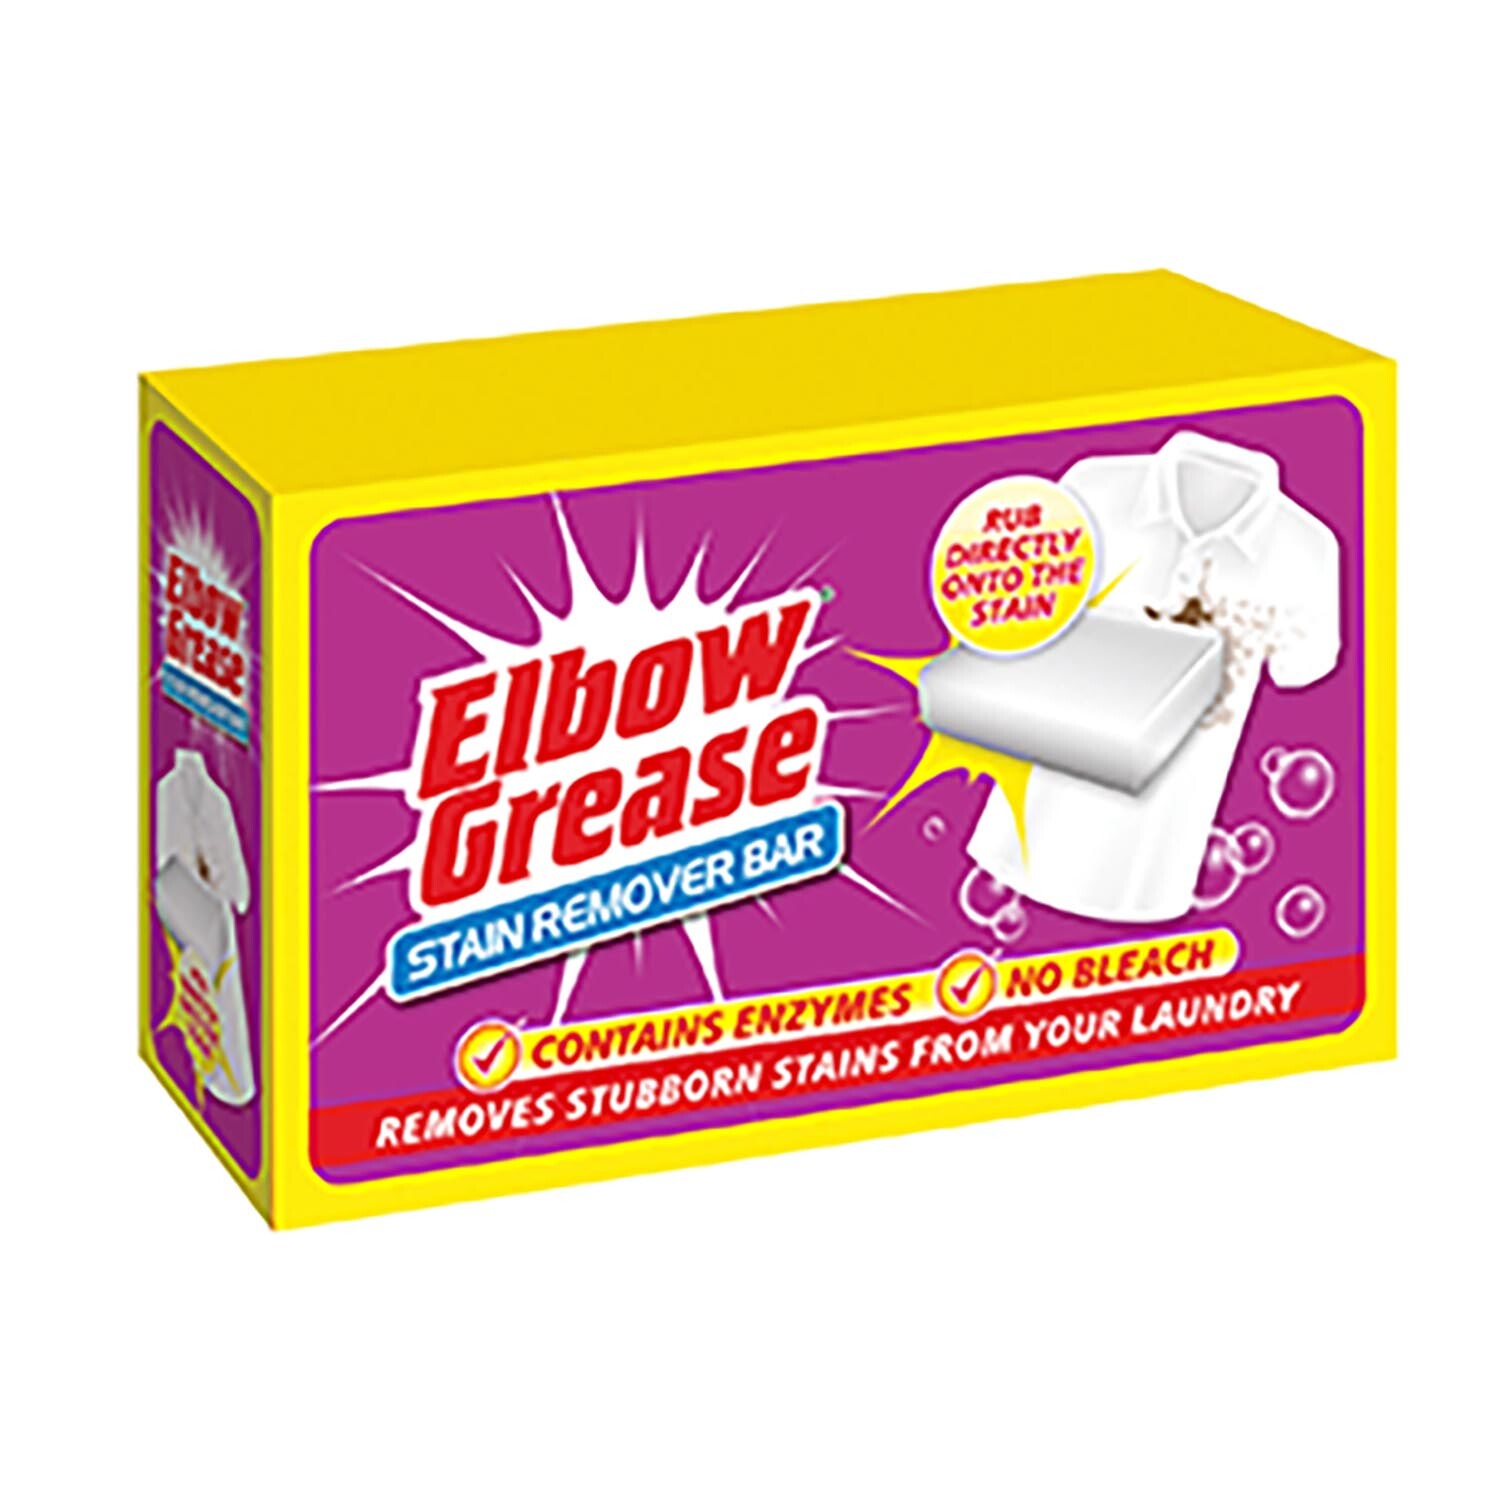 Elbow Grease Stain Remover Bar 100g Image